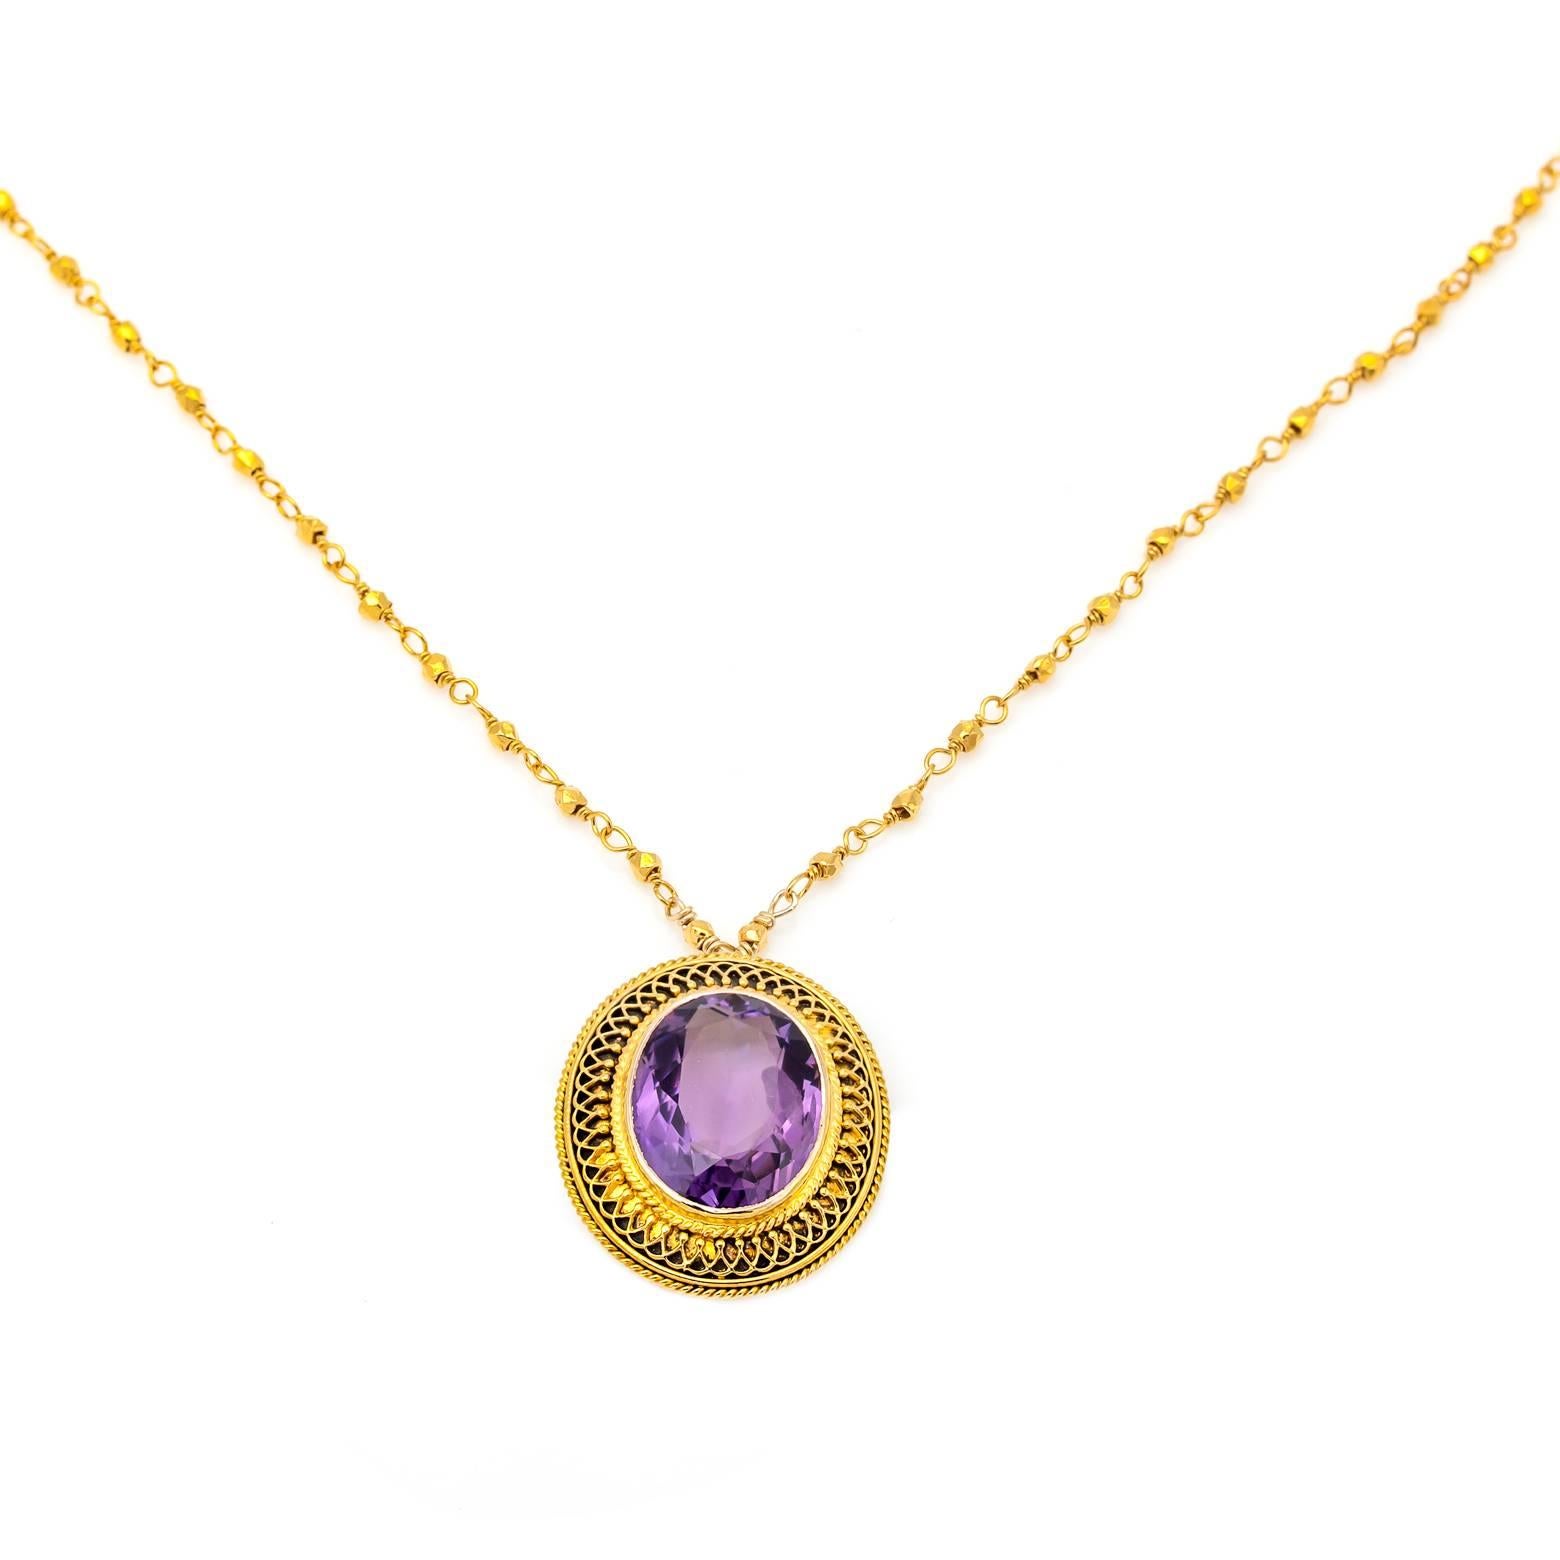 This stunning amethyst sparkles and dazzles in the light. The 14k gold setting has a filigree design that beautifully enhances the cut of the amethyst. The chain is 16 3/4